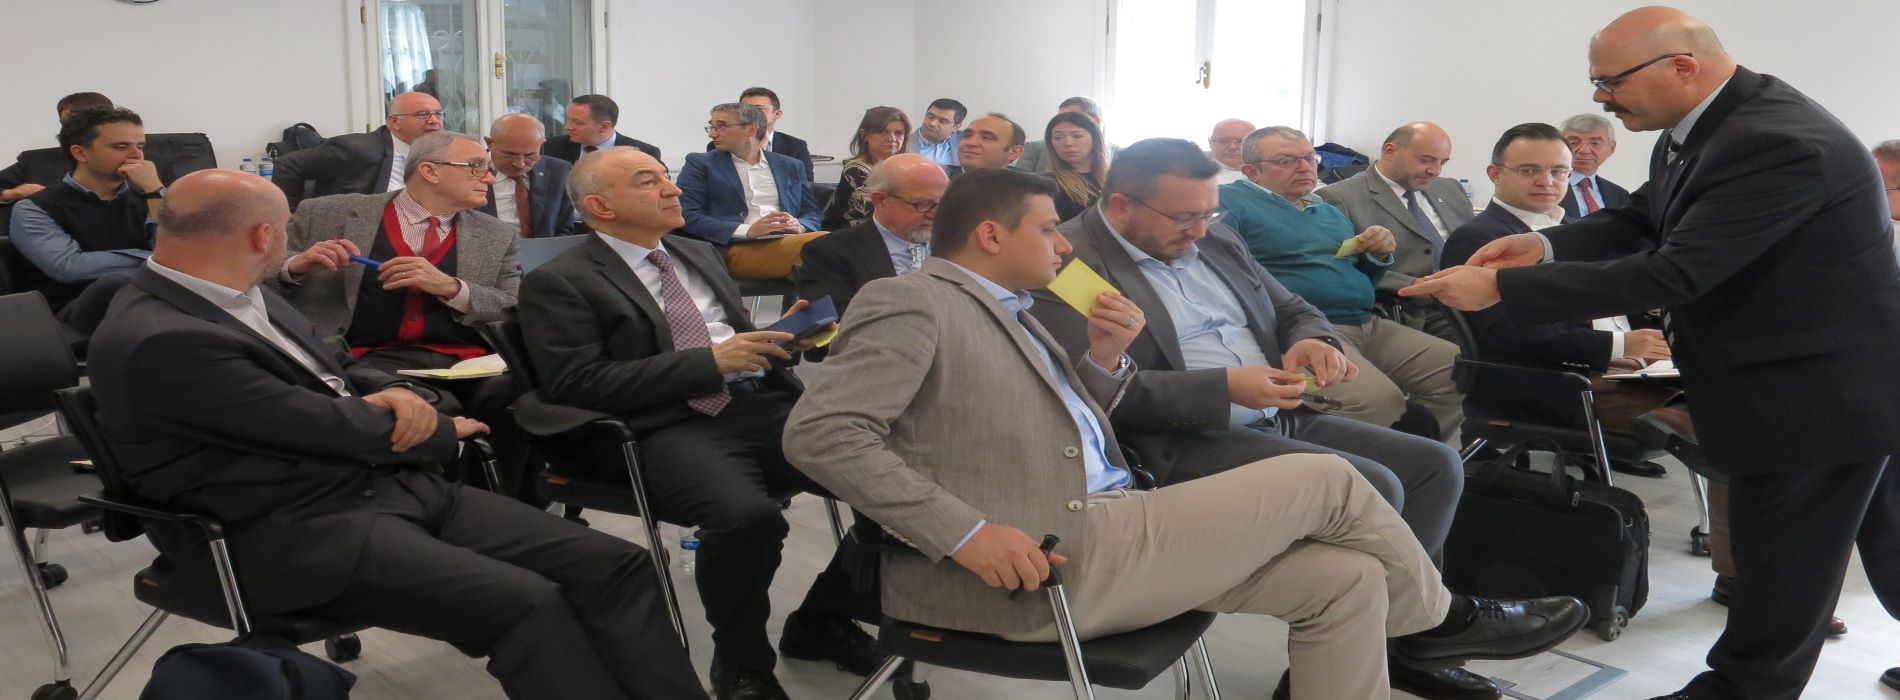 Future of Automotive Industry Workshops: Workshop-1 (Istanbul, April 24th 2019)